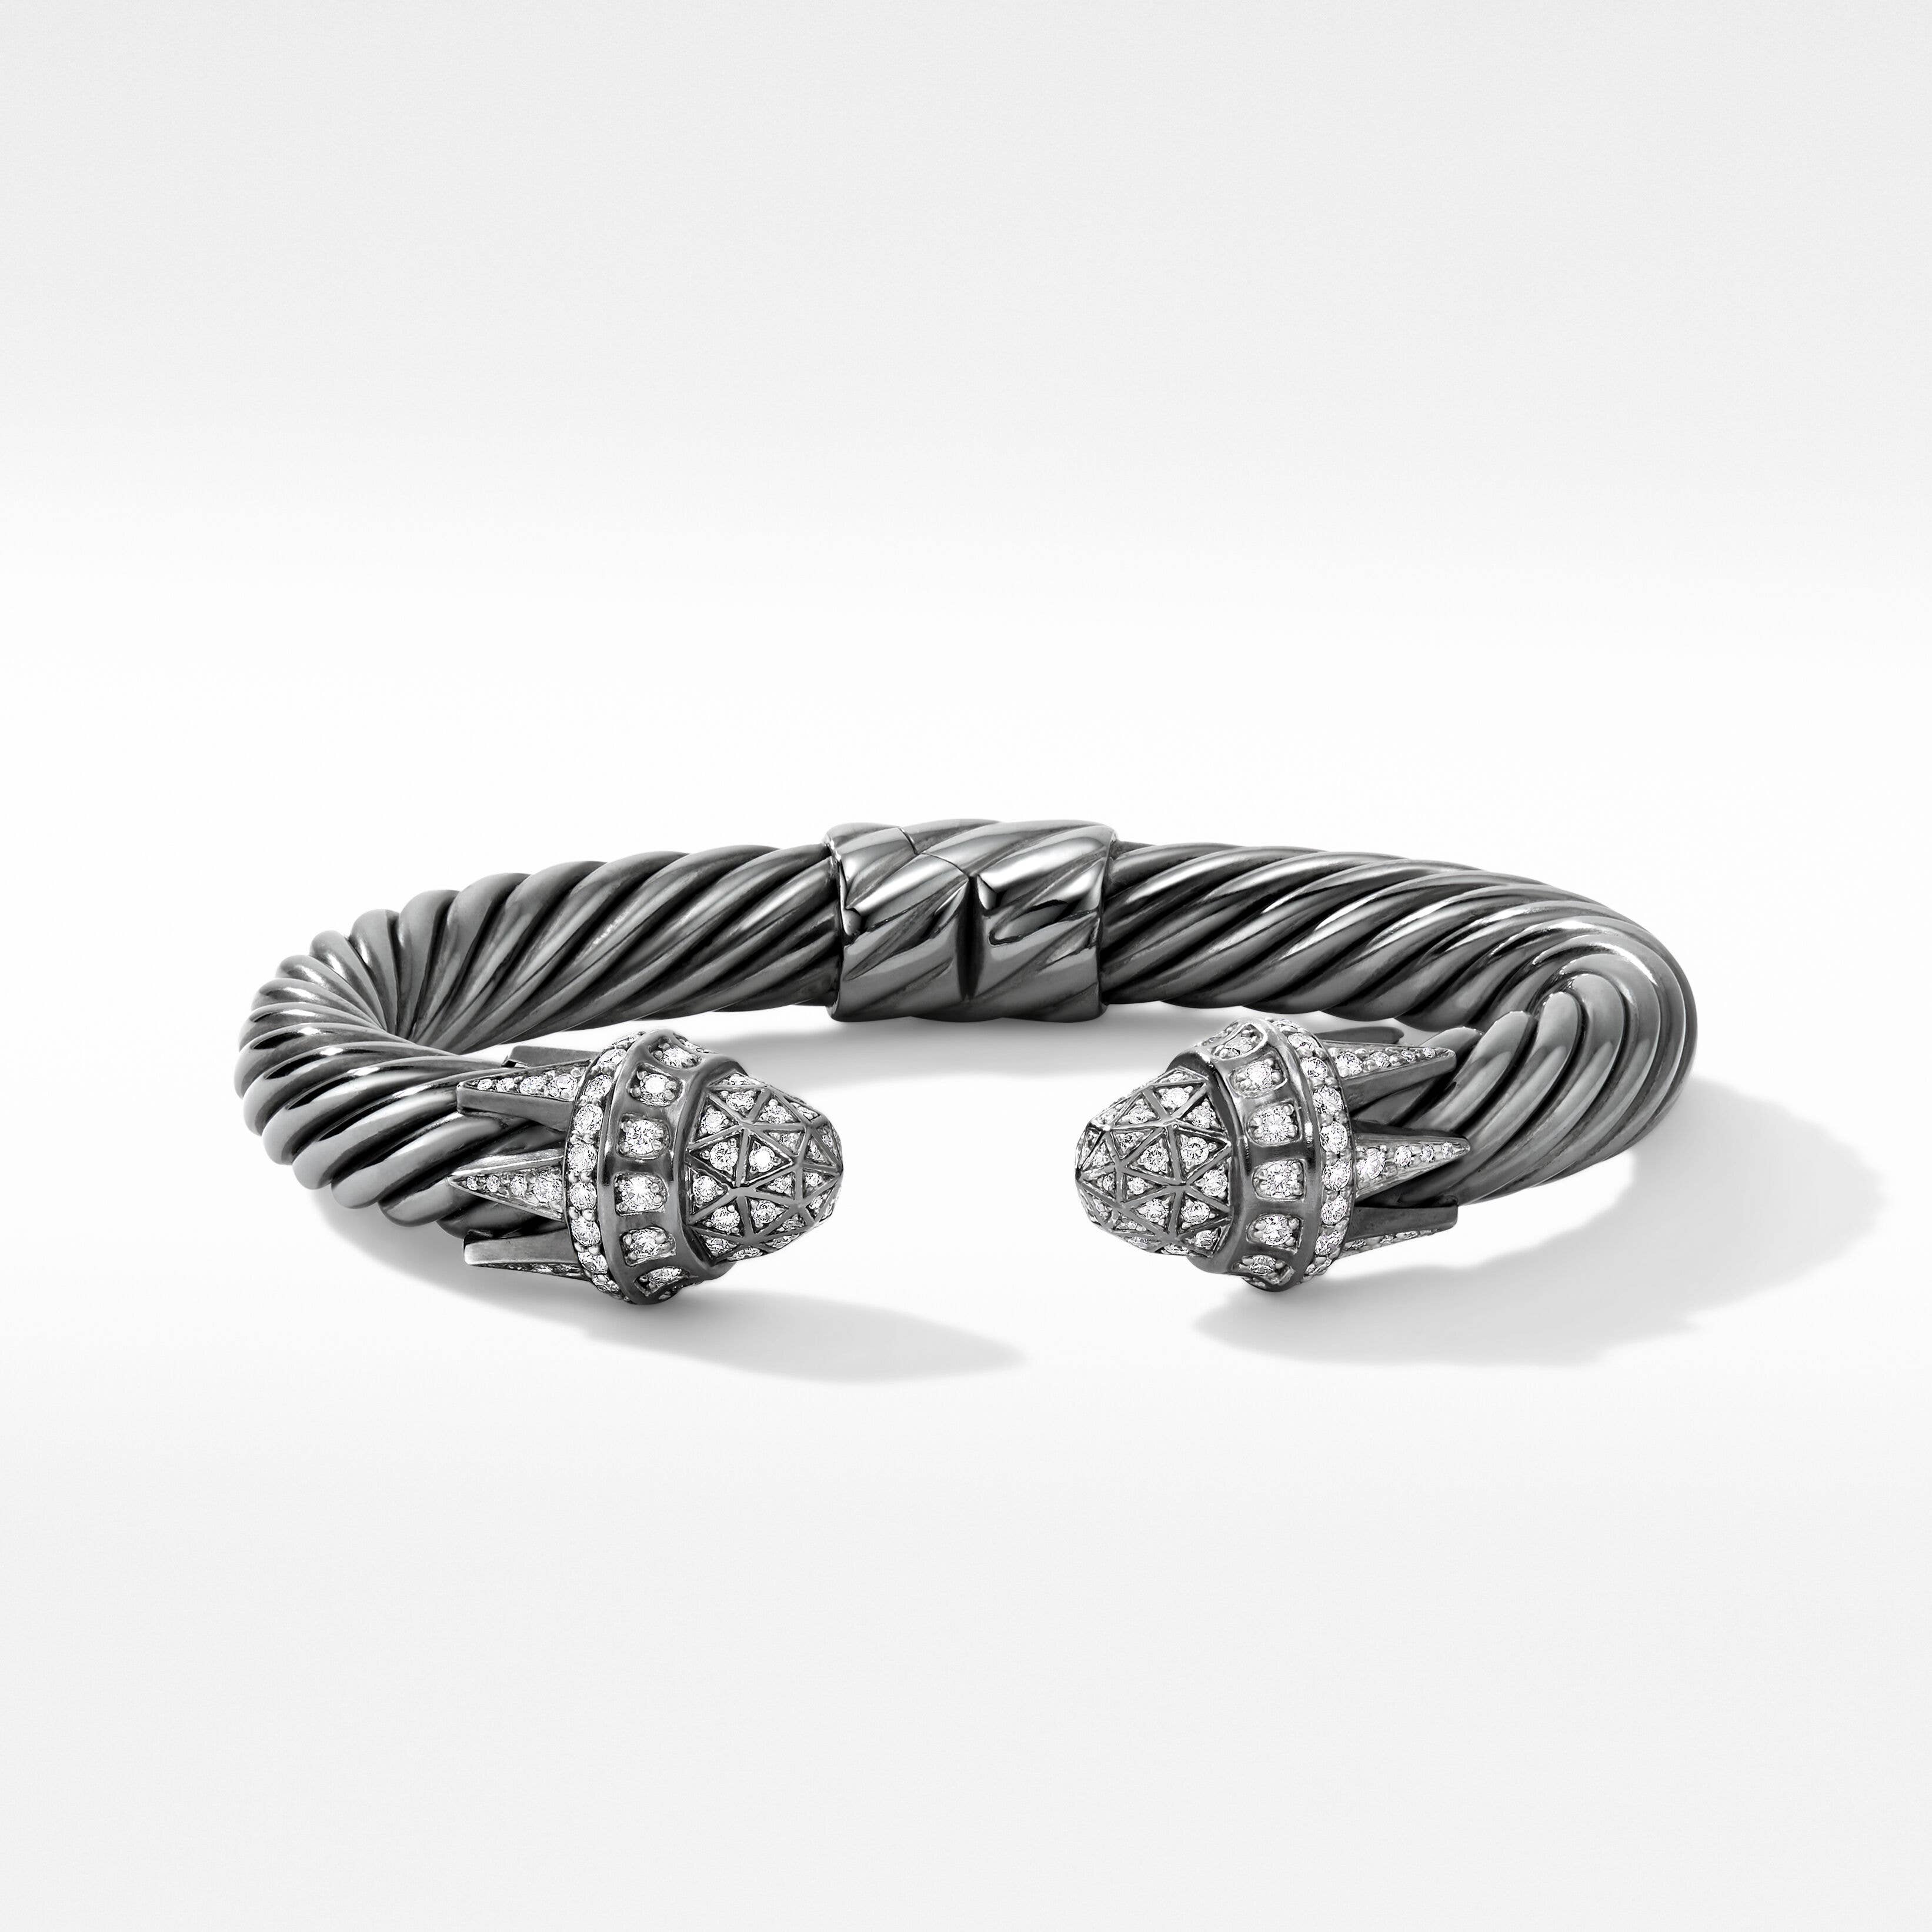 Statue of Liberty Cable Bracelet in Blackened Silver with Pavé Diamonds